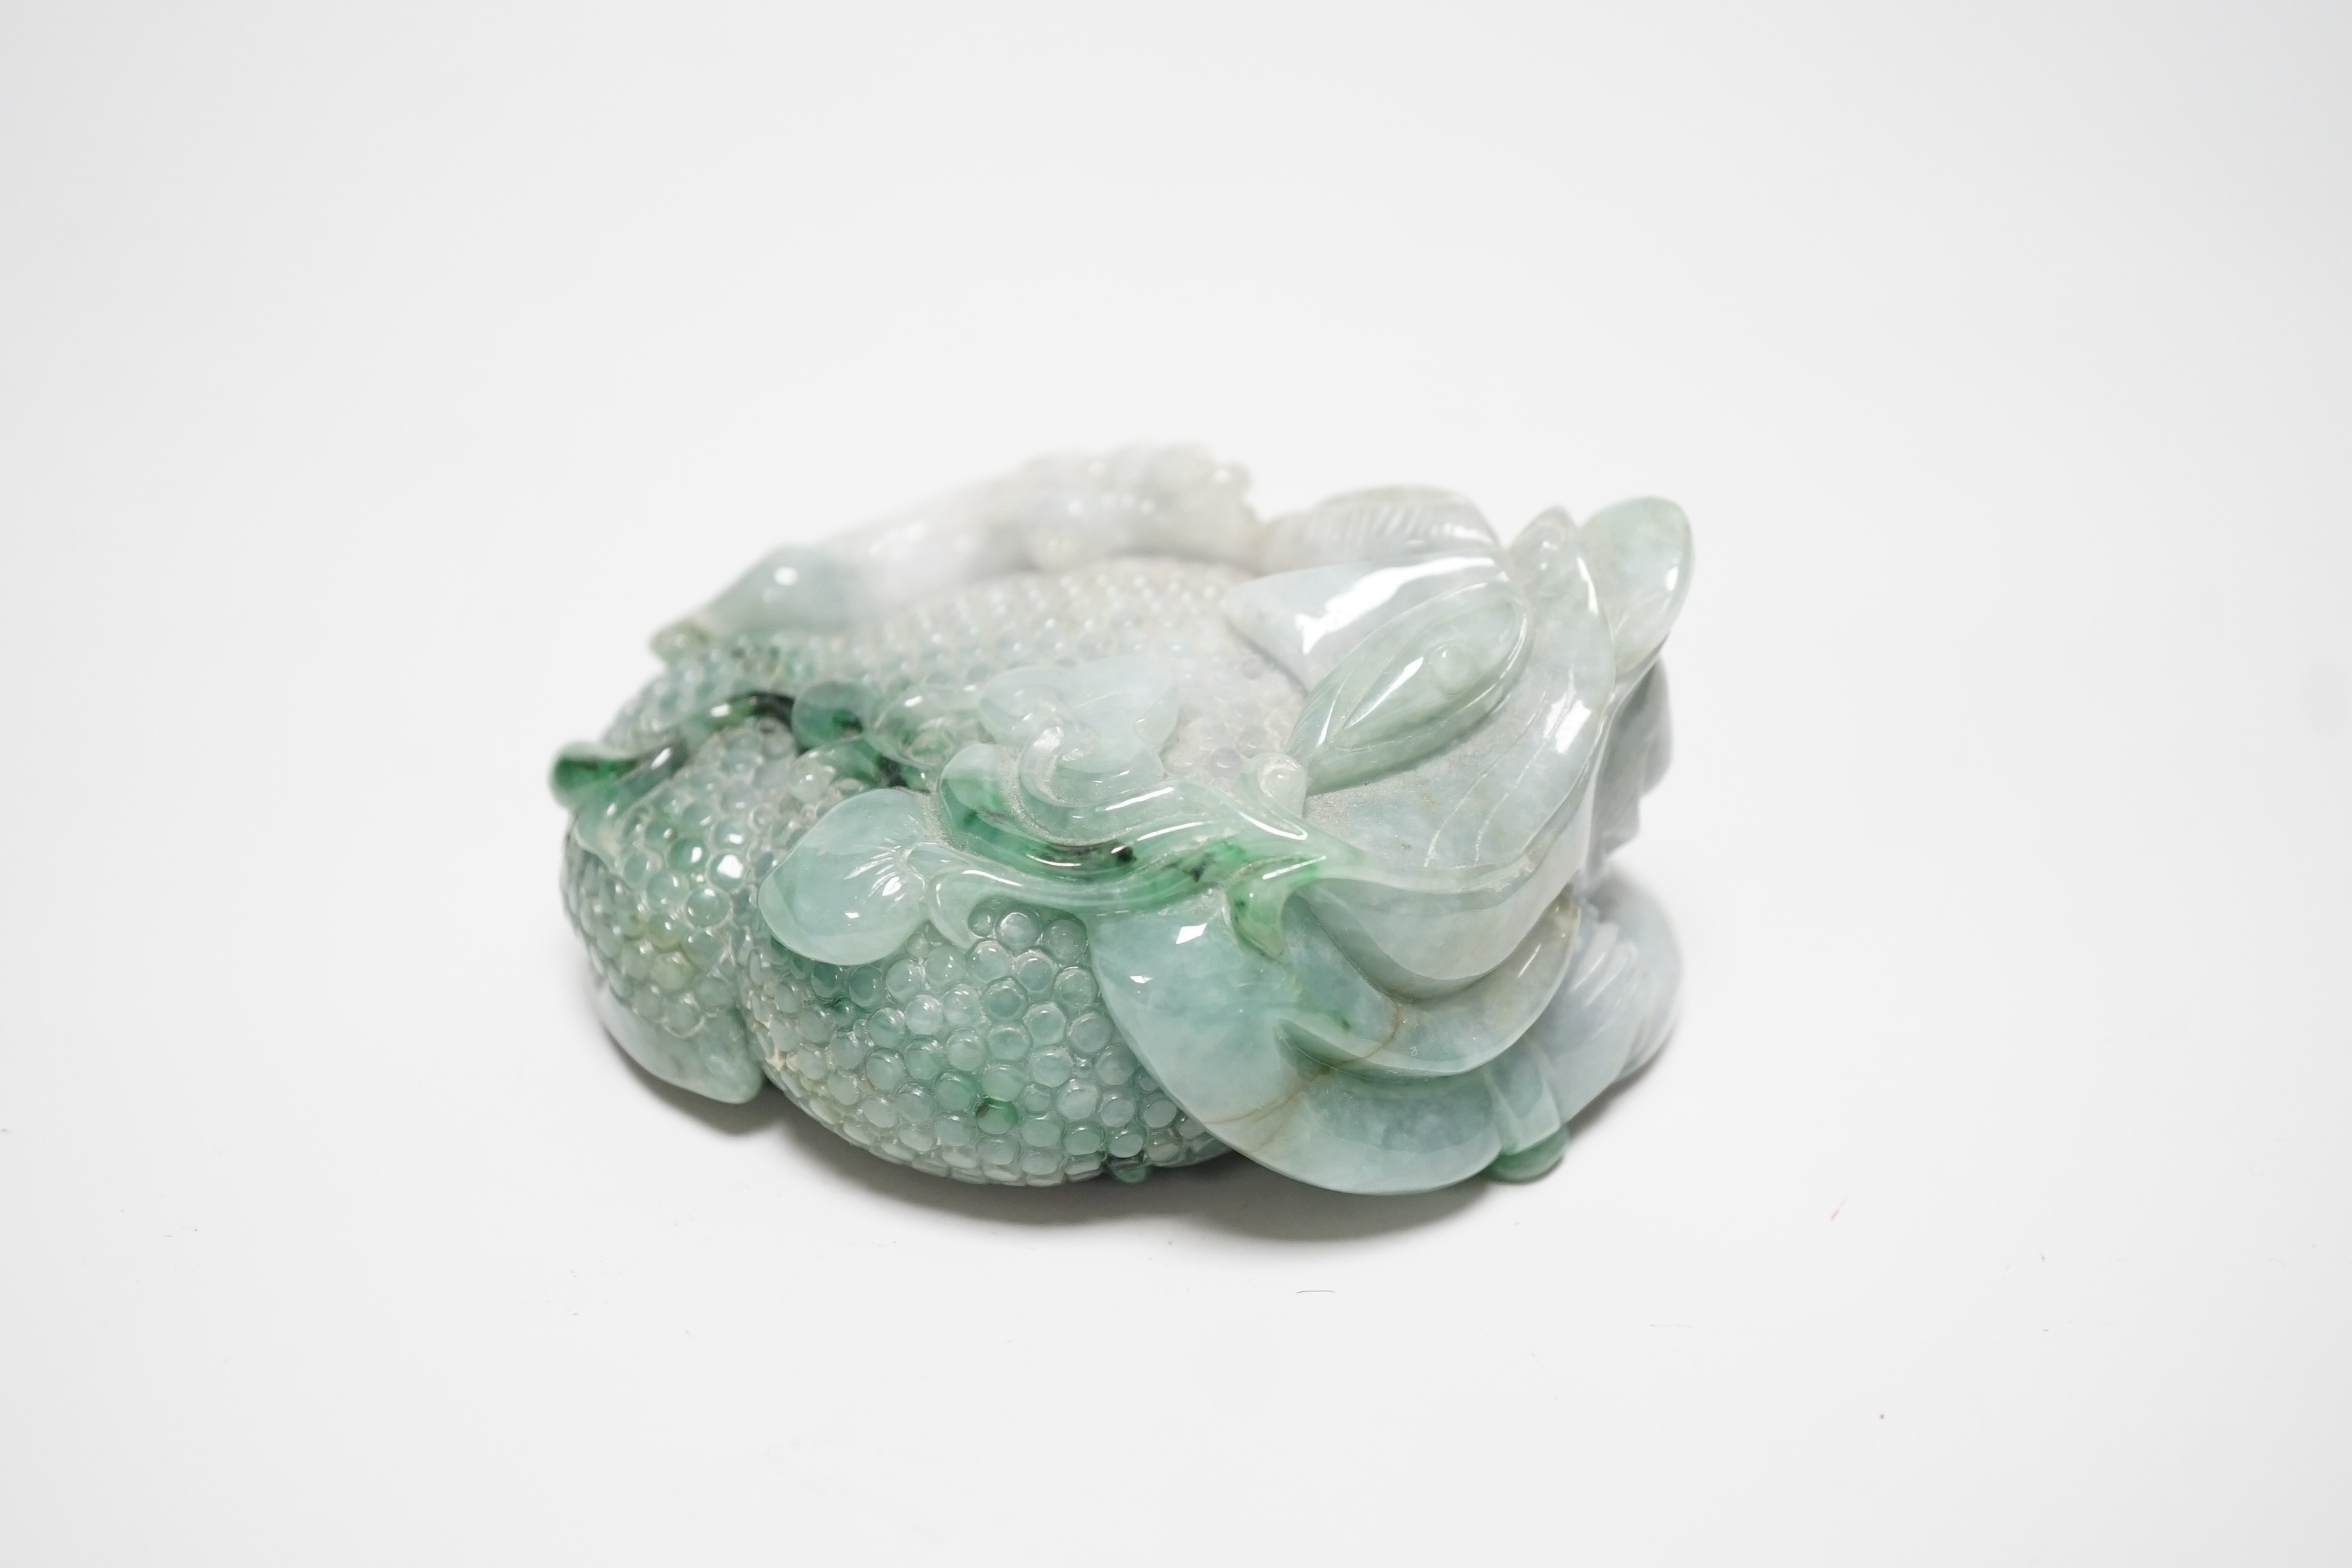 A Chinese jadeite carving of a toad, 10cm long - Image 5 of 6